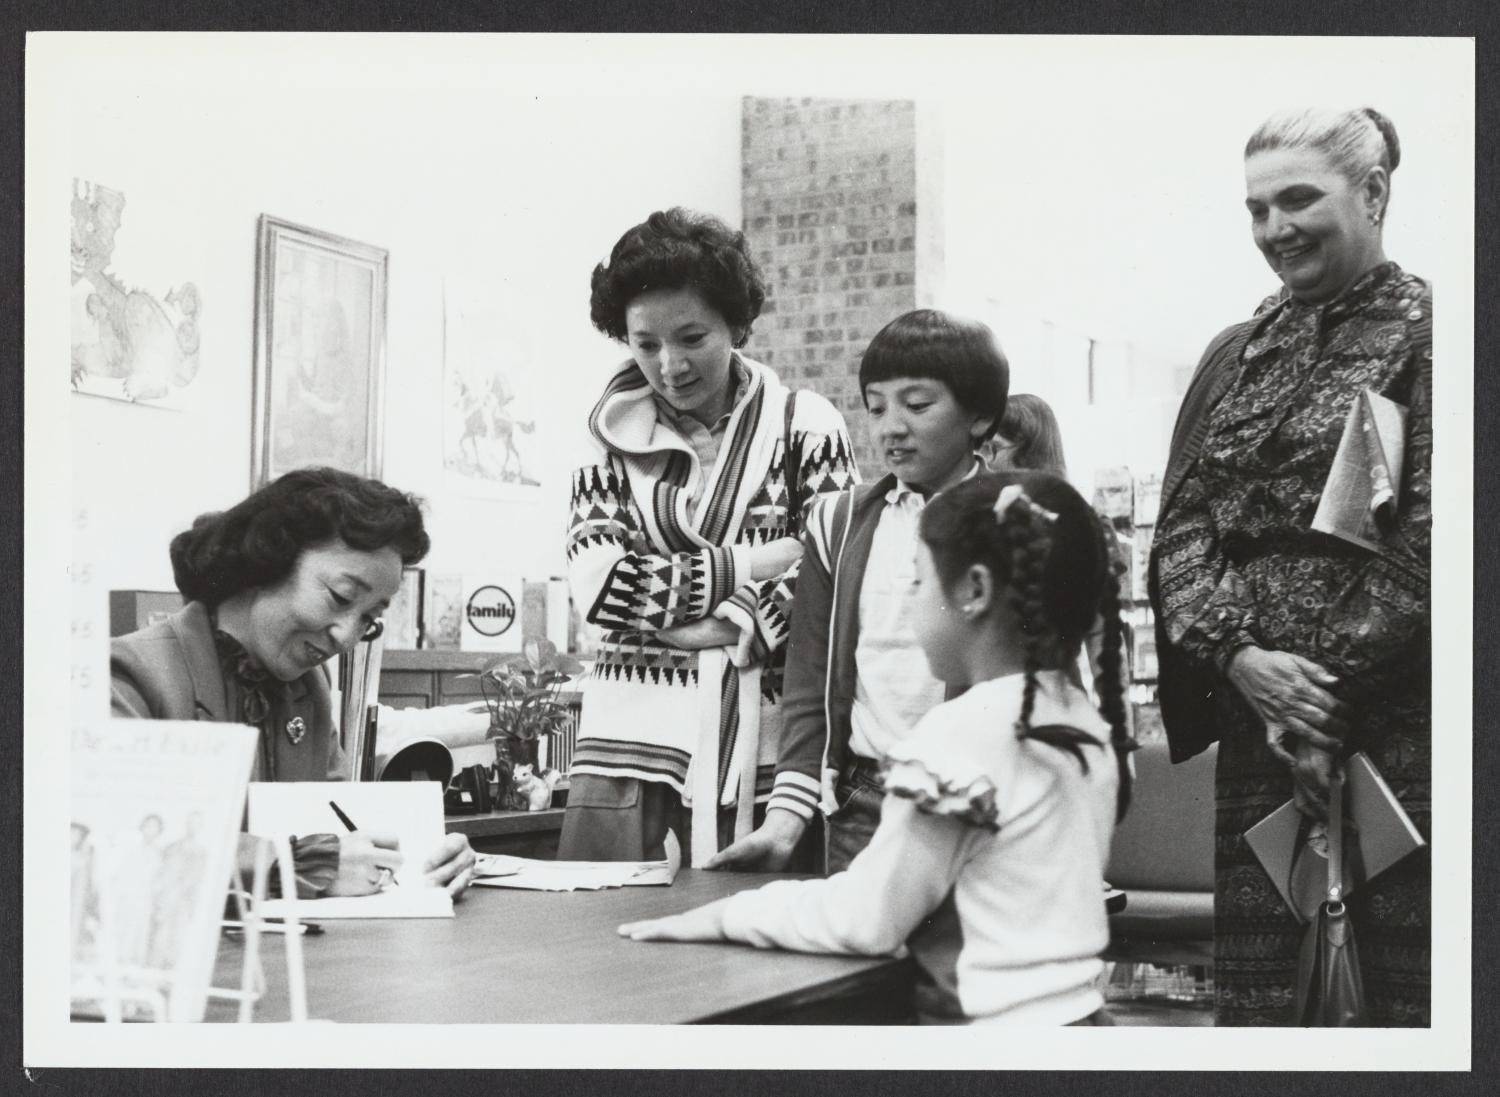 Yoshiko Uchida signing a book for a young Asian girl while two adults and an older boy look on.